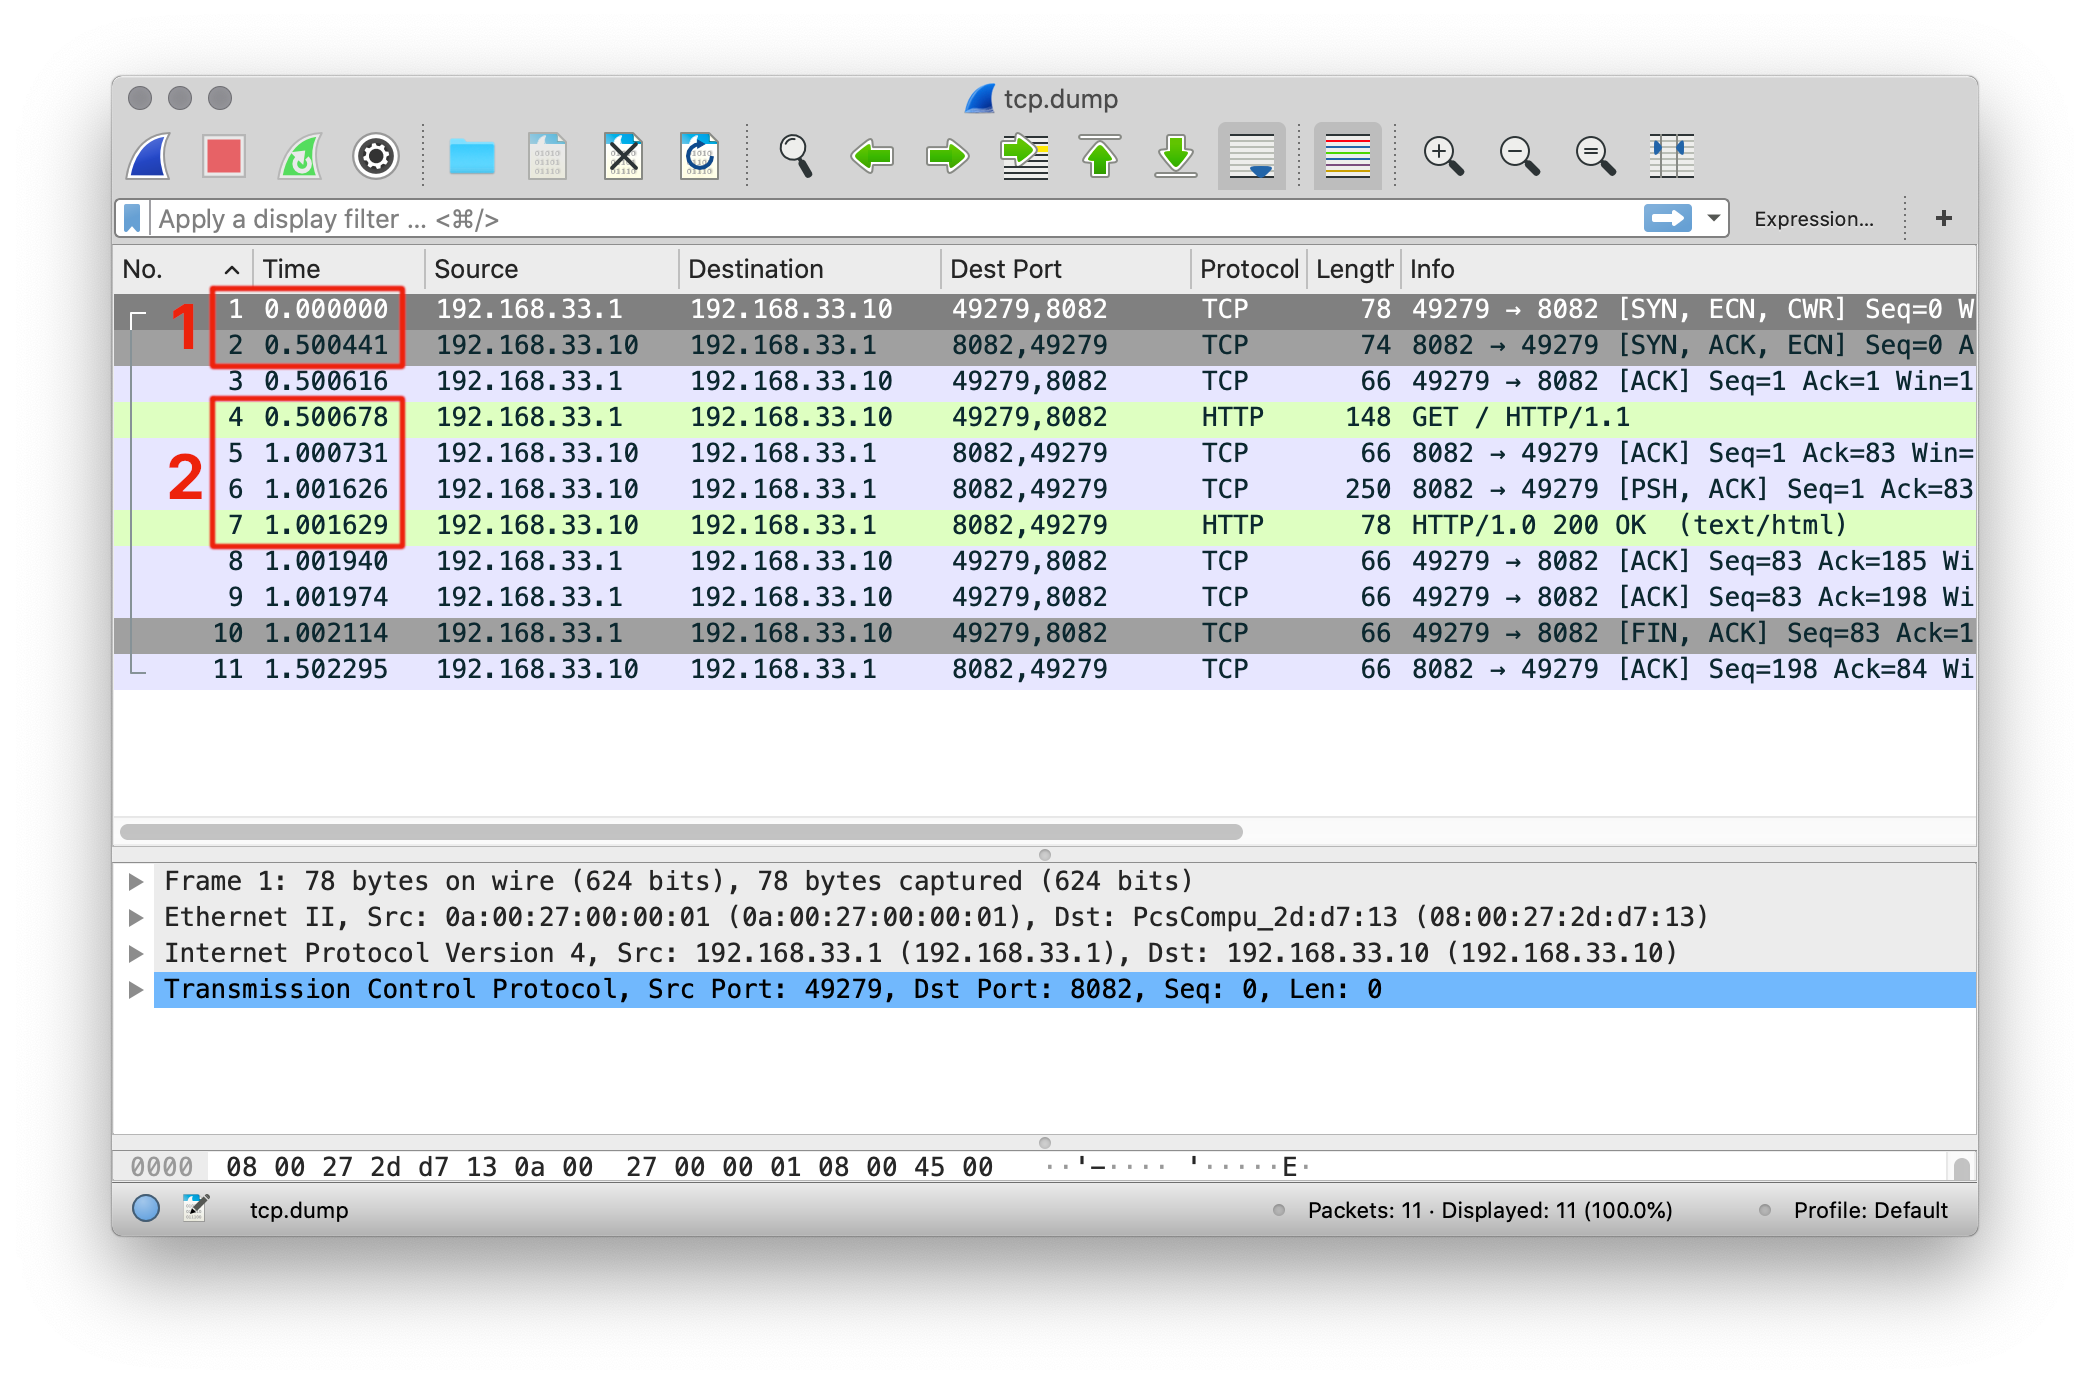 Wireshark showing the effects of the attack.